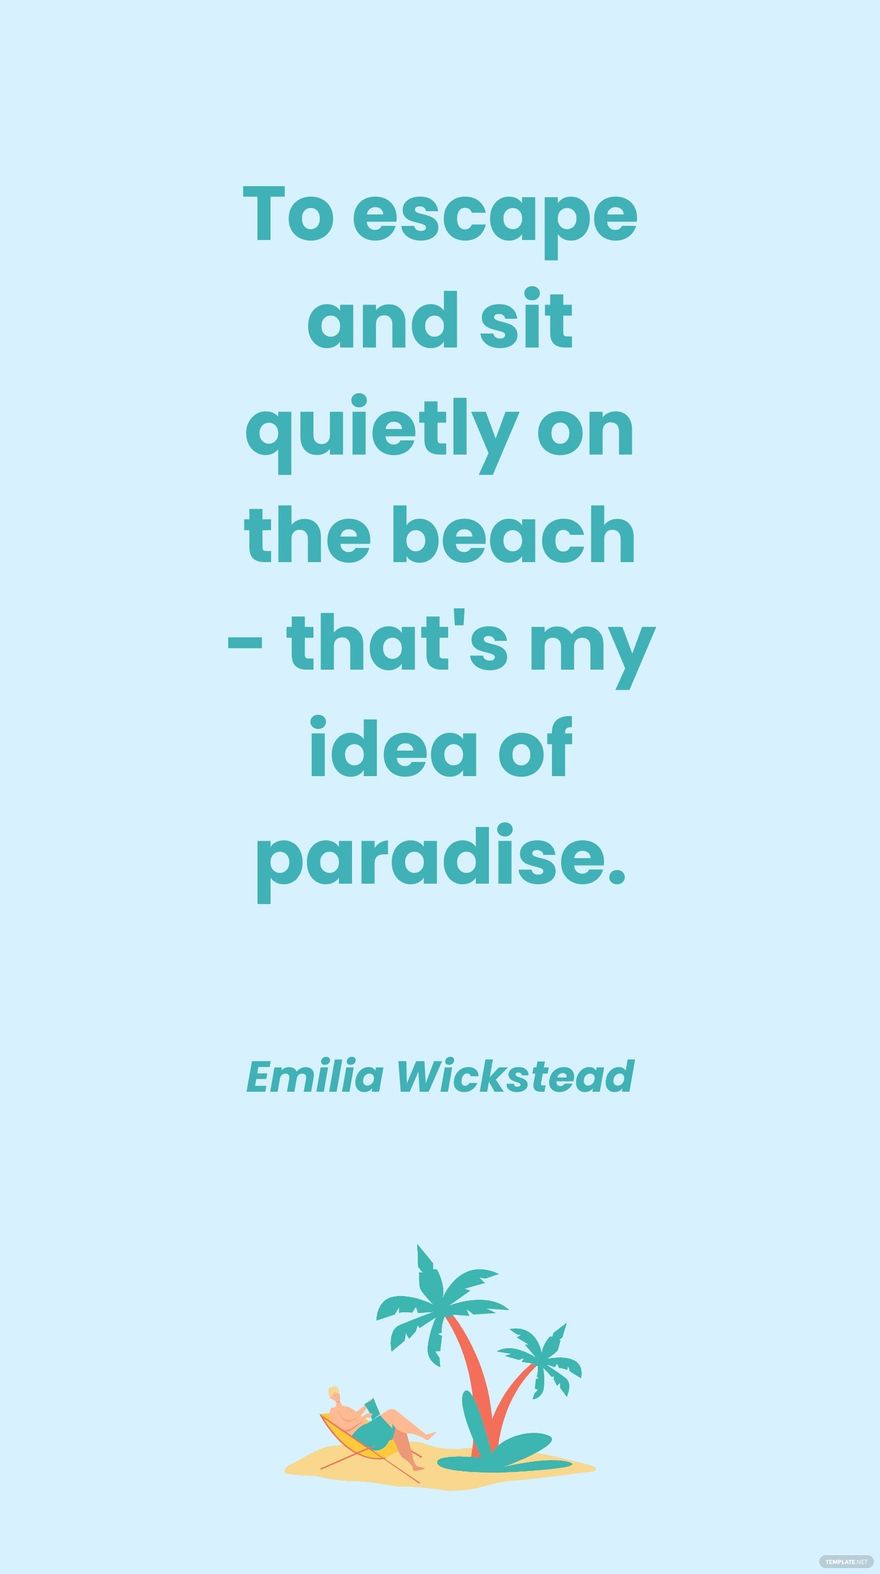 Emilia Wickstead - To escape and sit quietly on the beach - that's my idea of paradise.